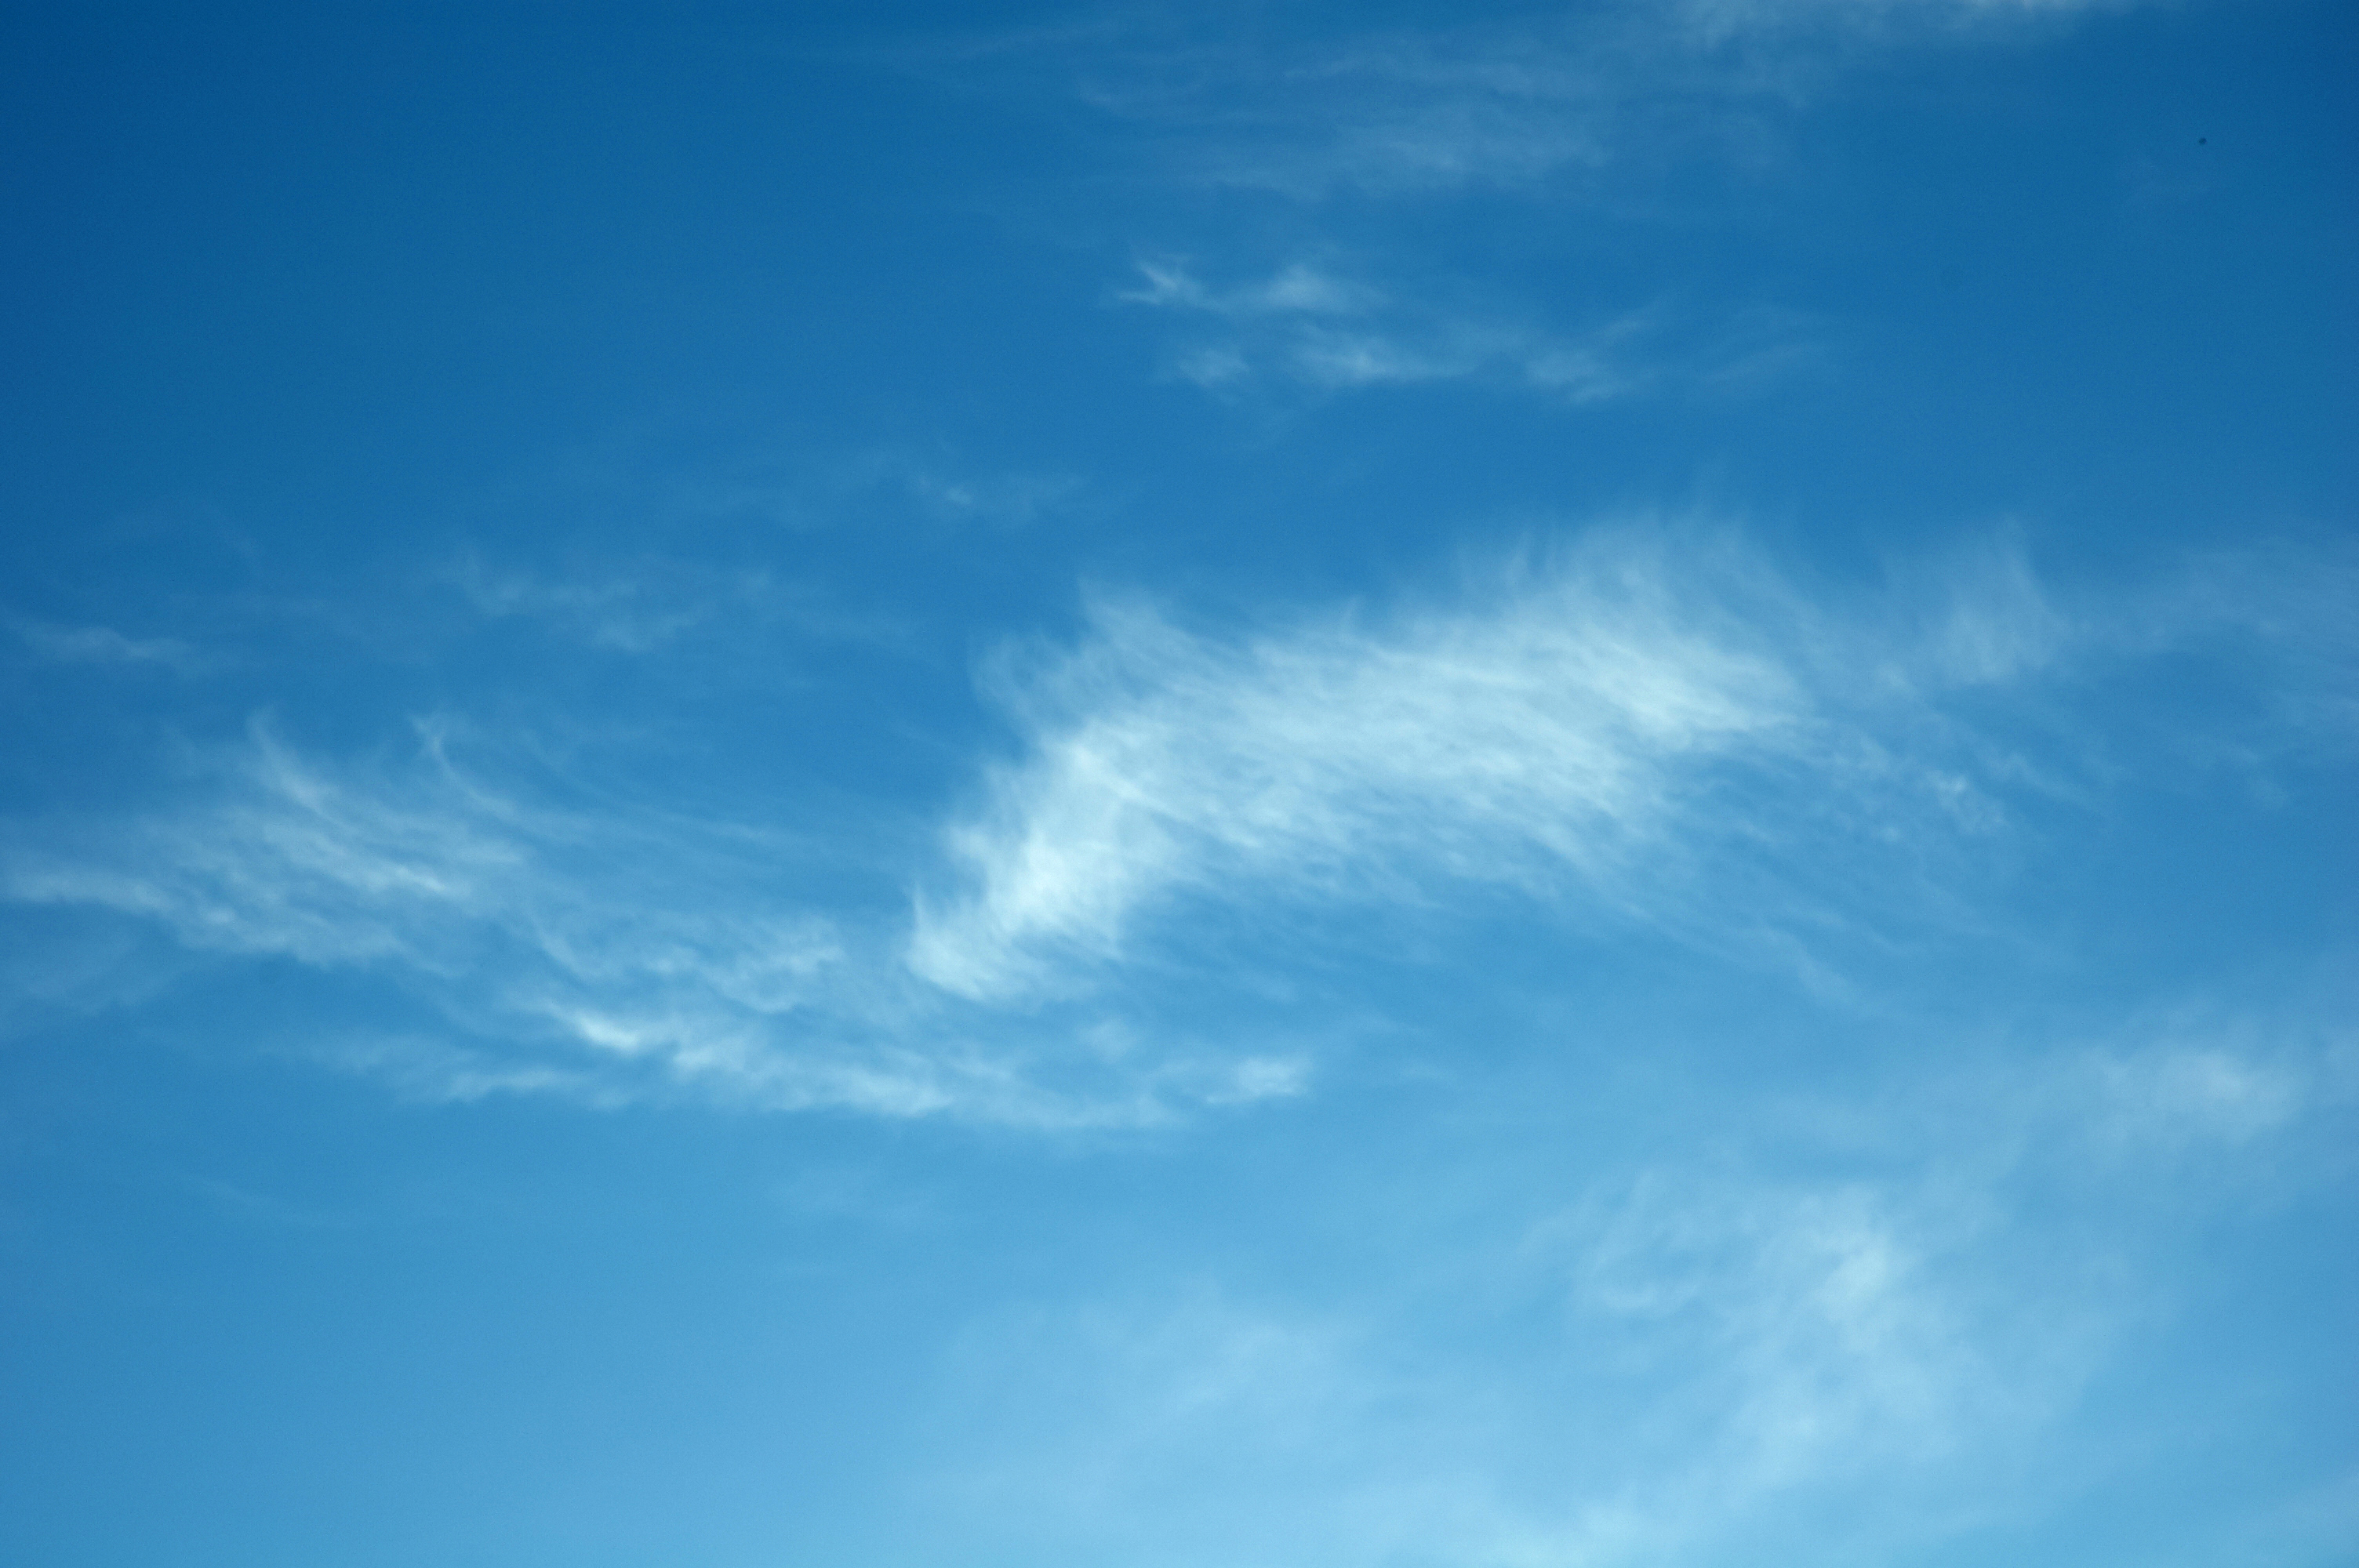 File:Clouds and blue sky in Russia. IMG  - Wikimedia Commons